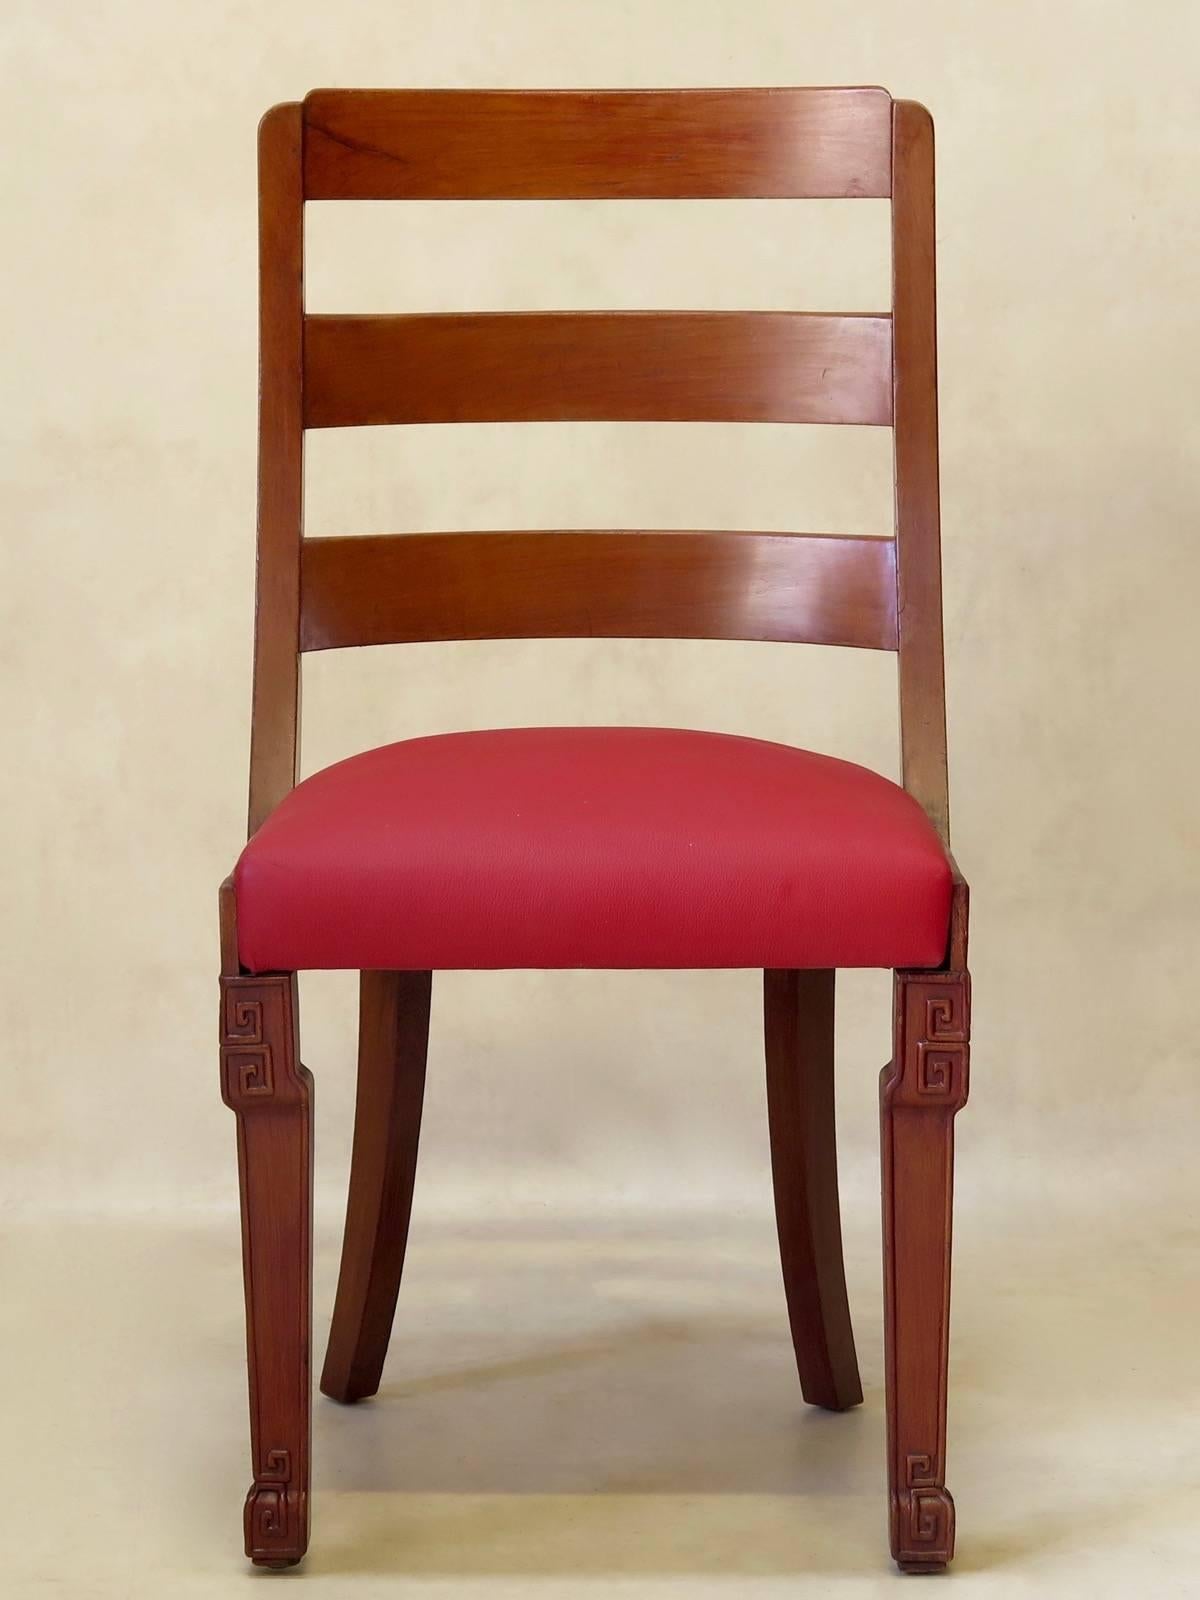 Attractive set of six Chinese Art Deco dining chairs with agreeable, rounded backs, saber back legs, and minimally engraved front legs. The seats are upholstered in cerise red leather.